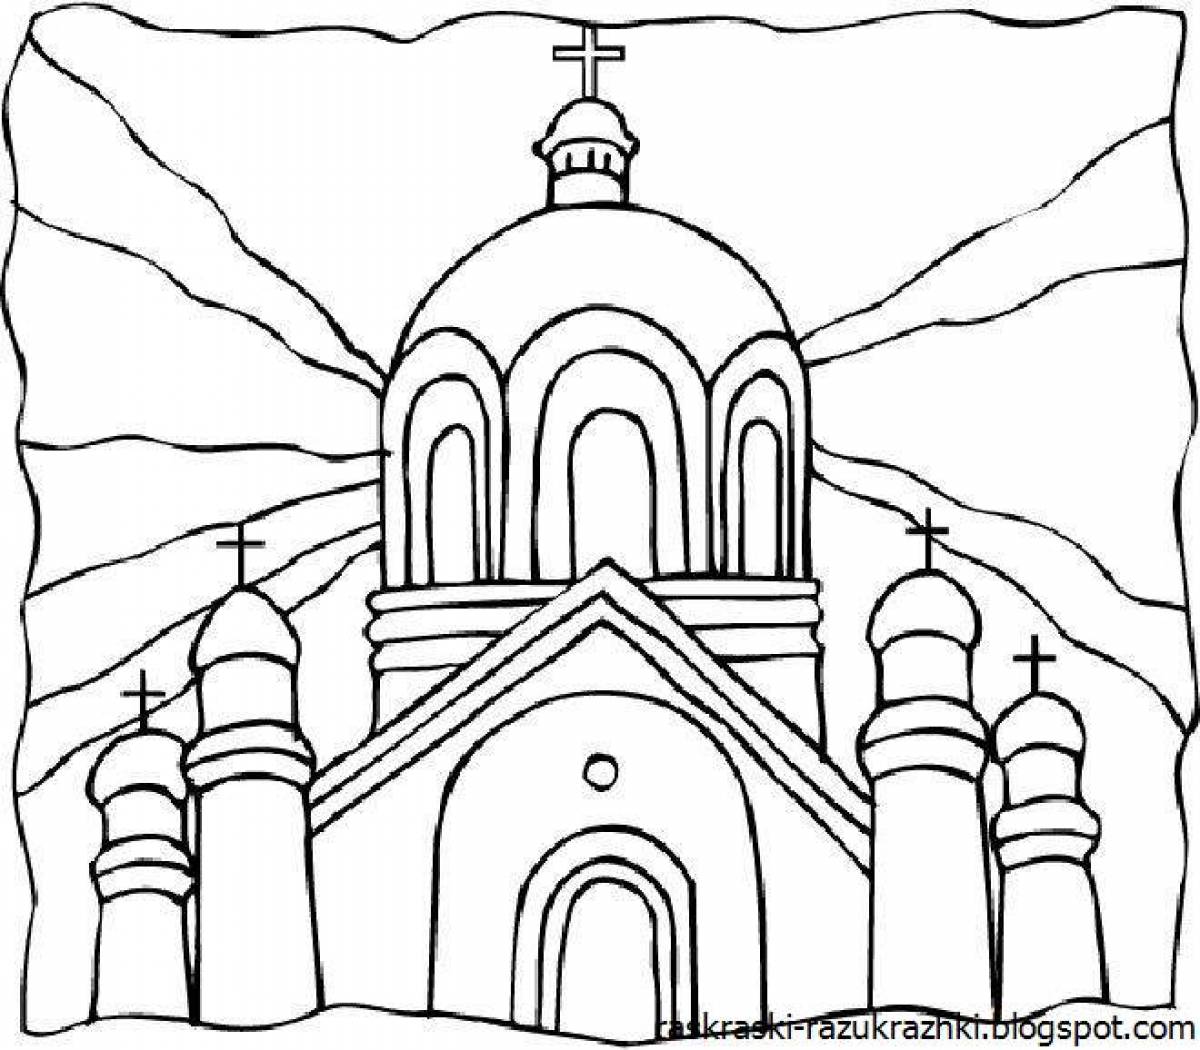 Great temple coloring book